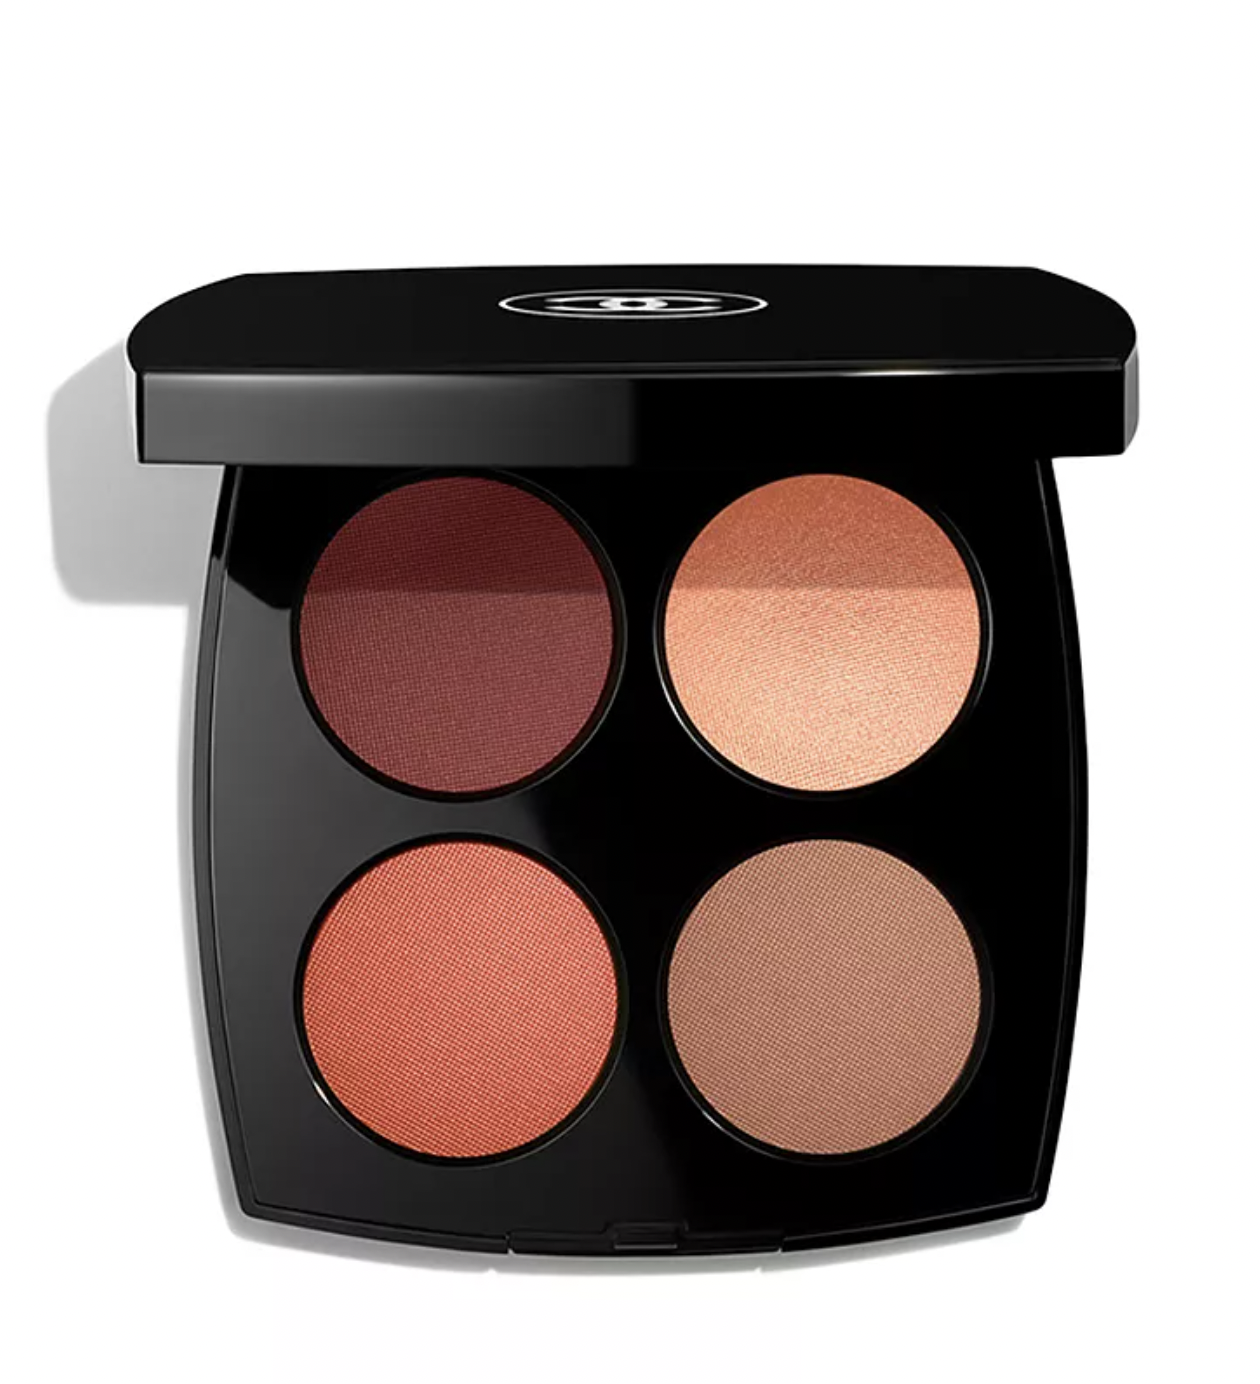 Les 4 Rouges Yeux et Joues Eyeshadow and Blush Palette in Tendresse